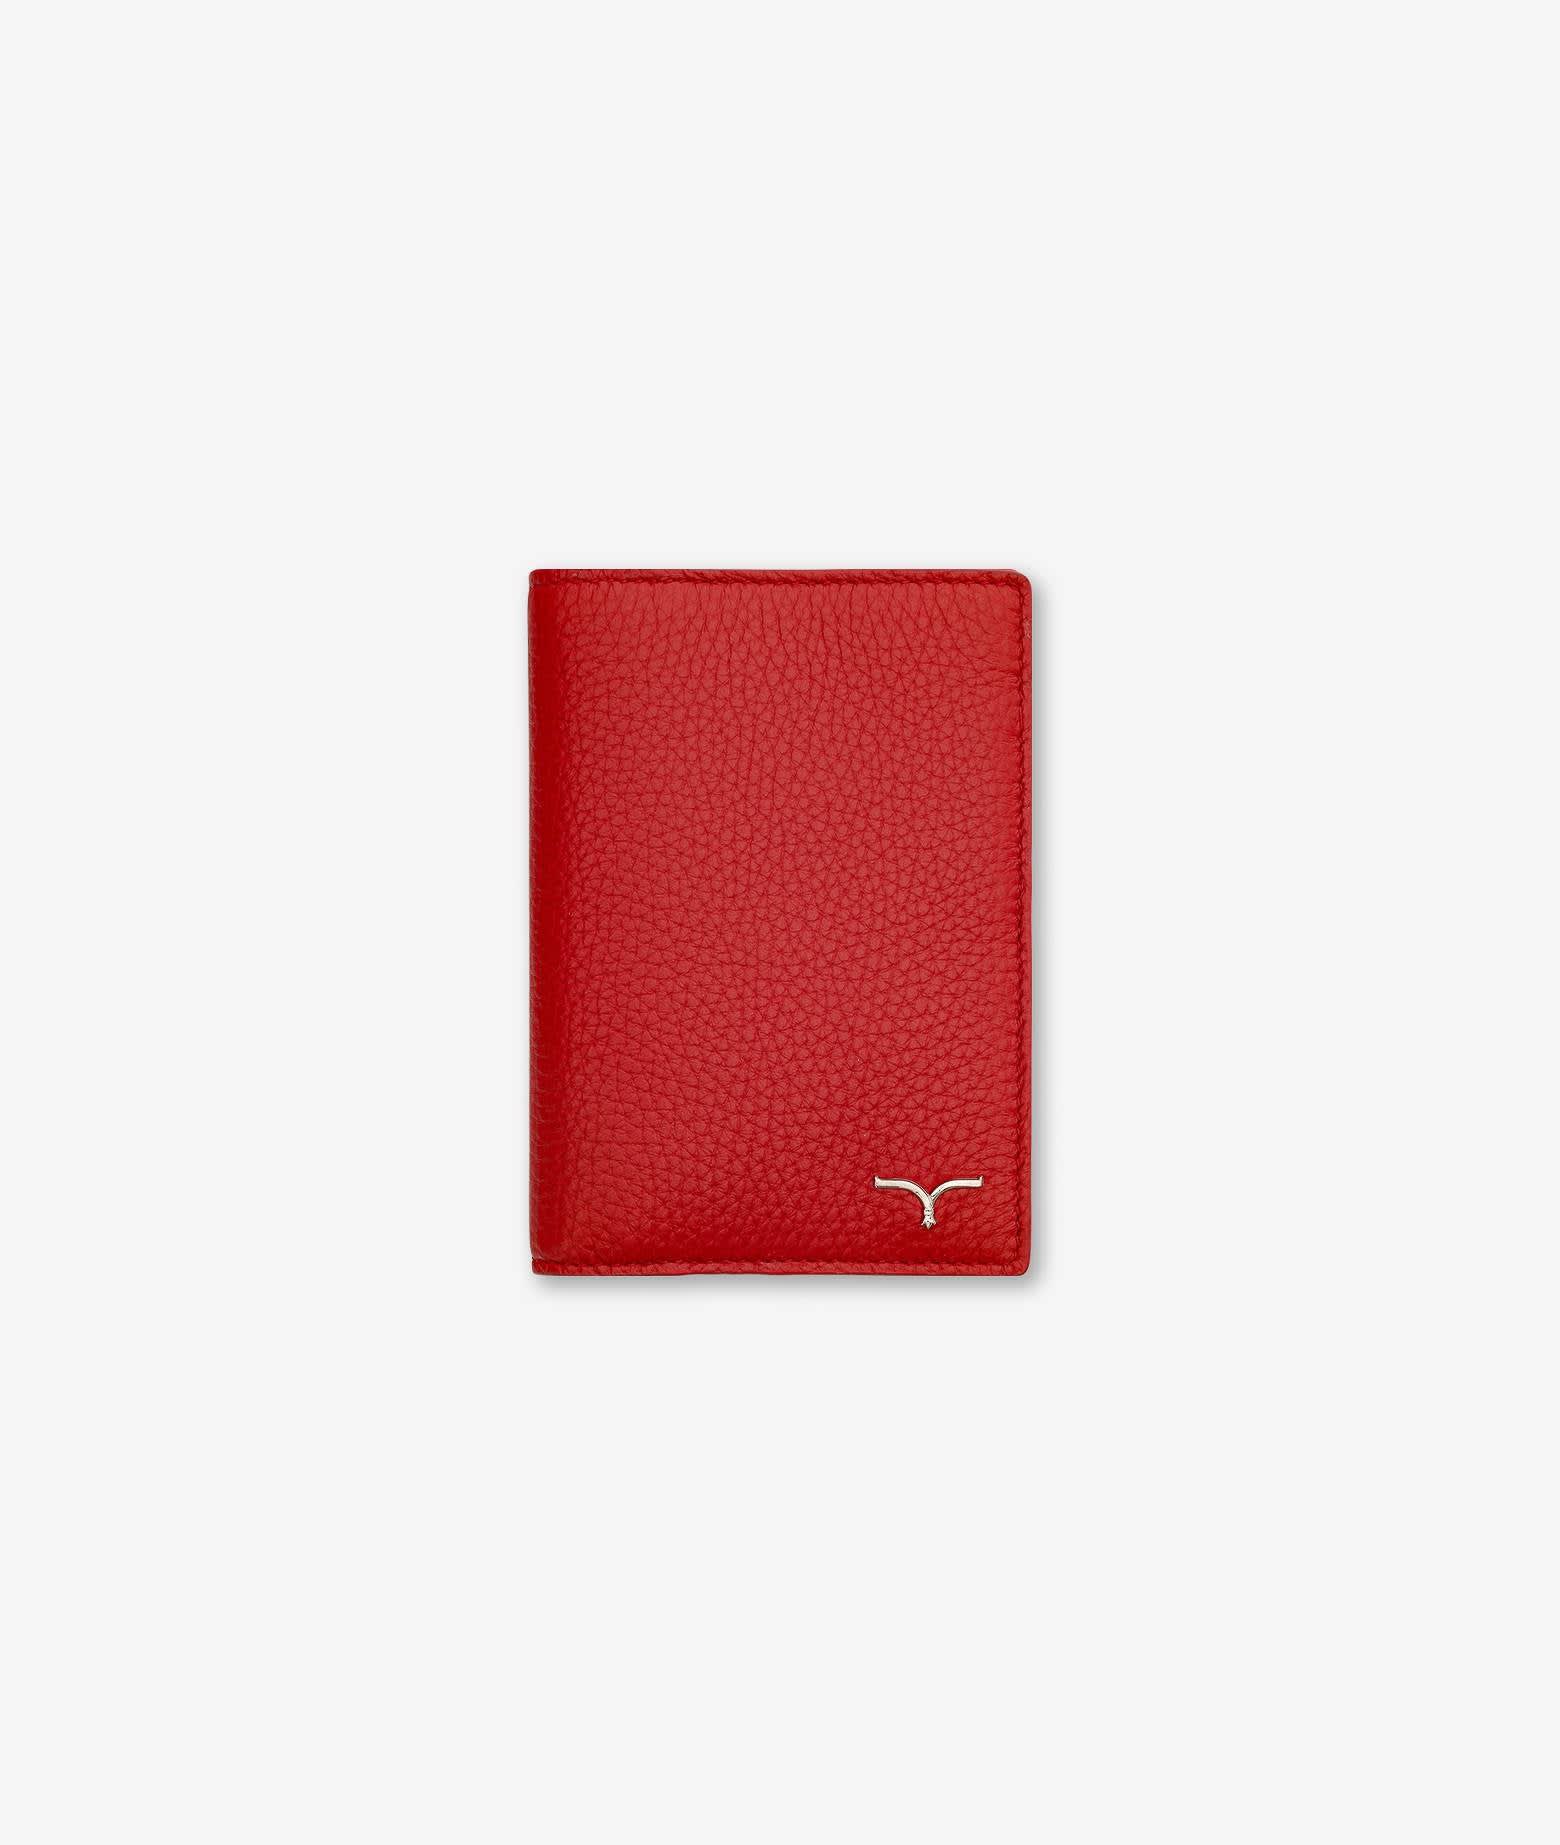 Larusmiani Passport Cover Fiumicino Wallet In Red